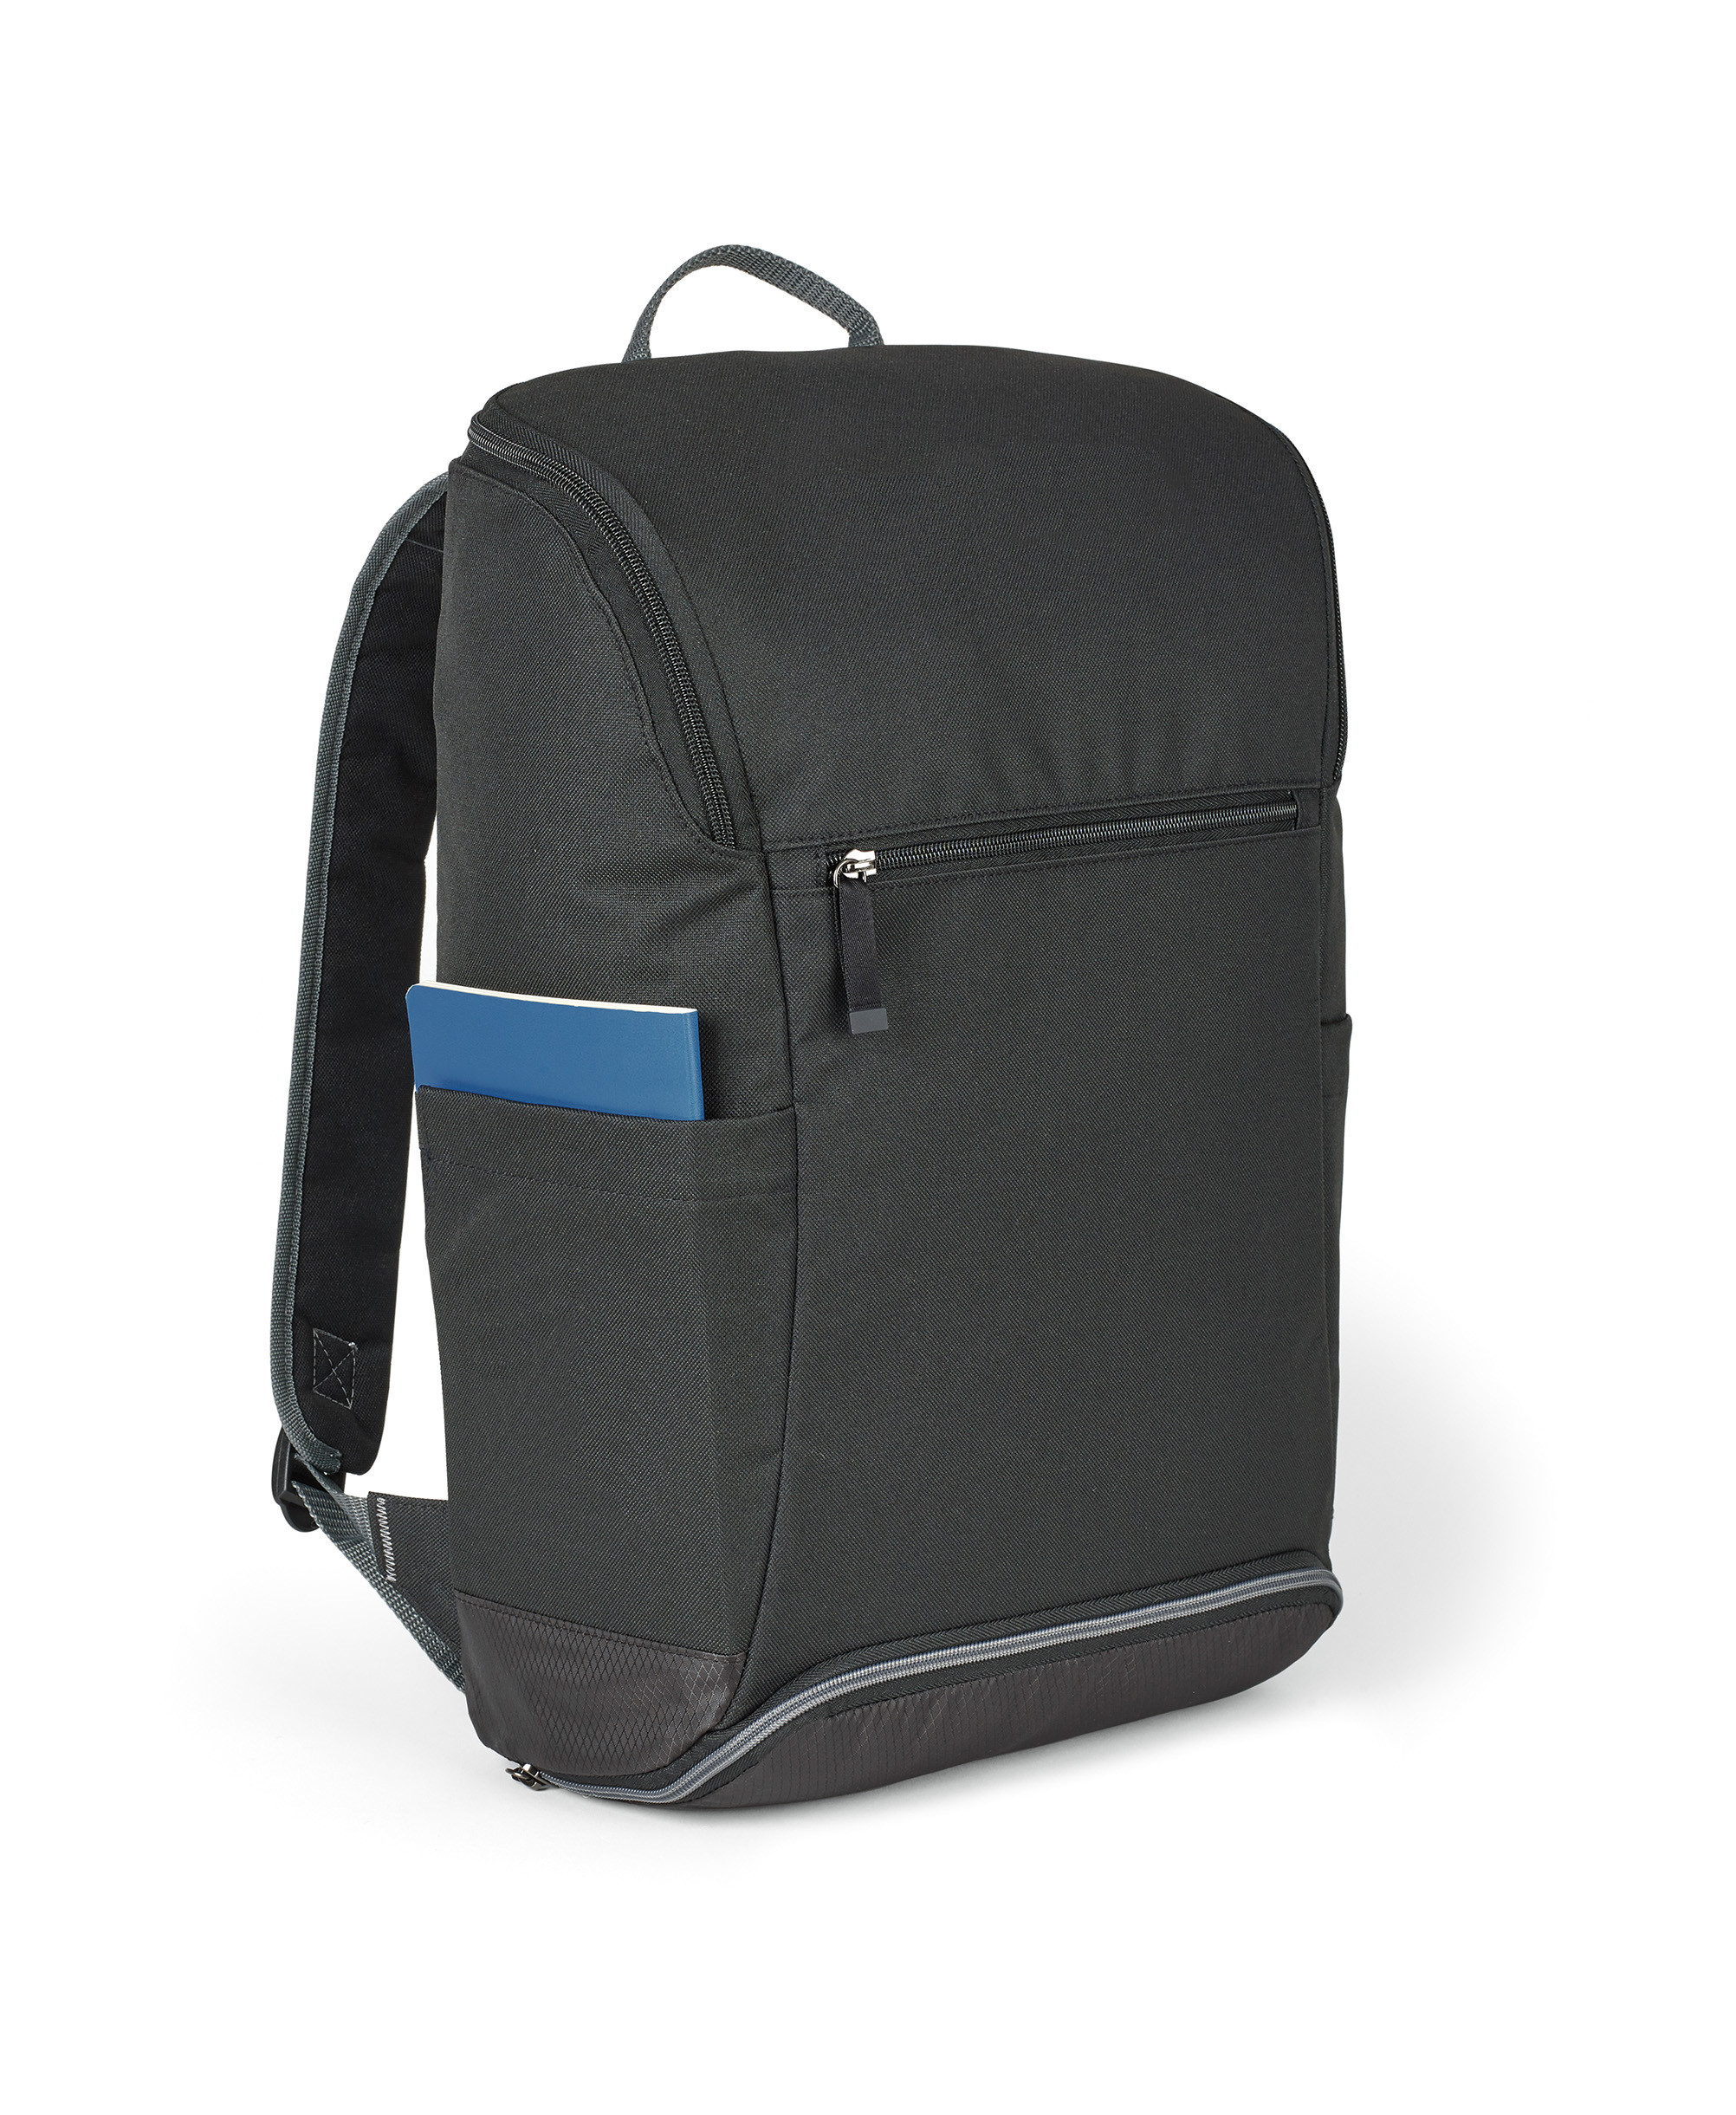 Gemline 100054 - All Day Computer Backpack